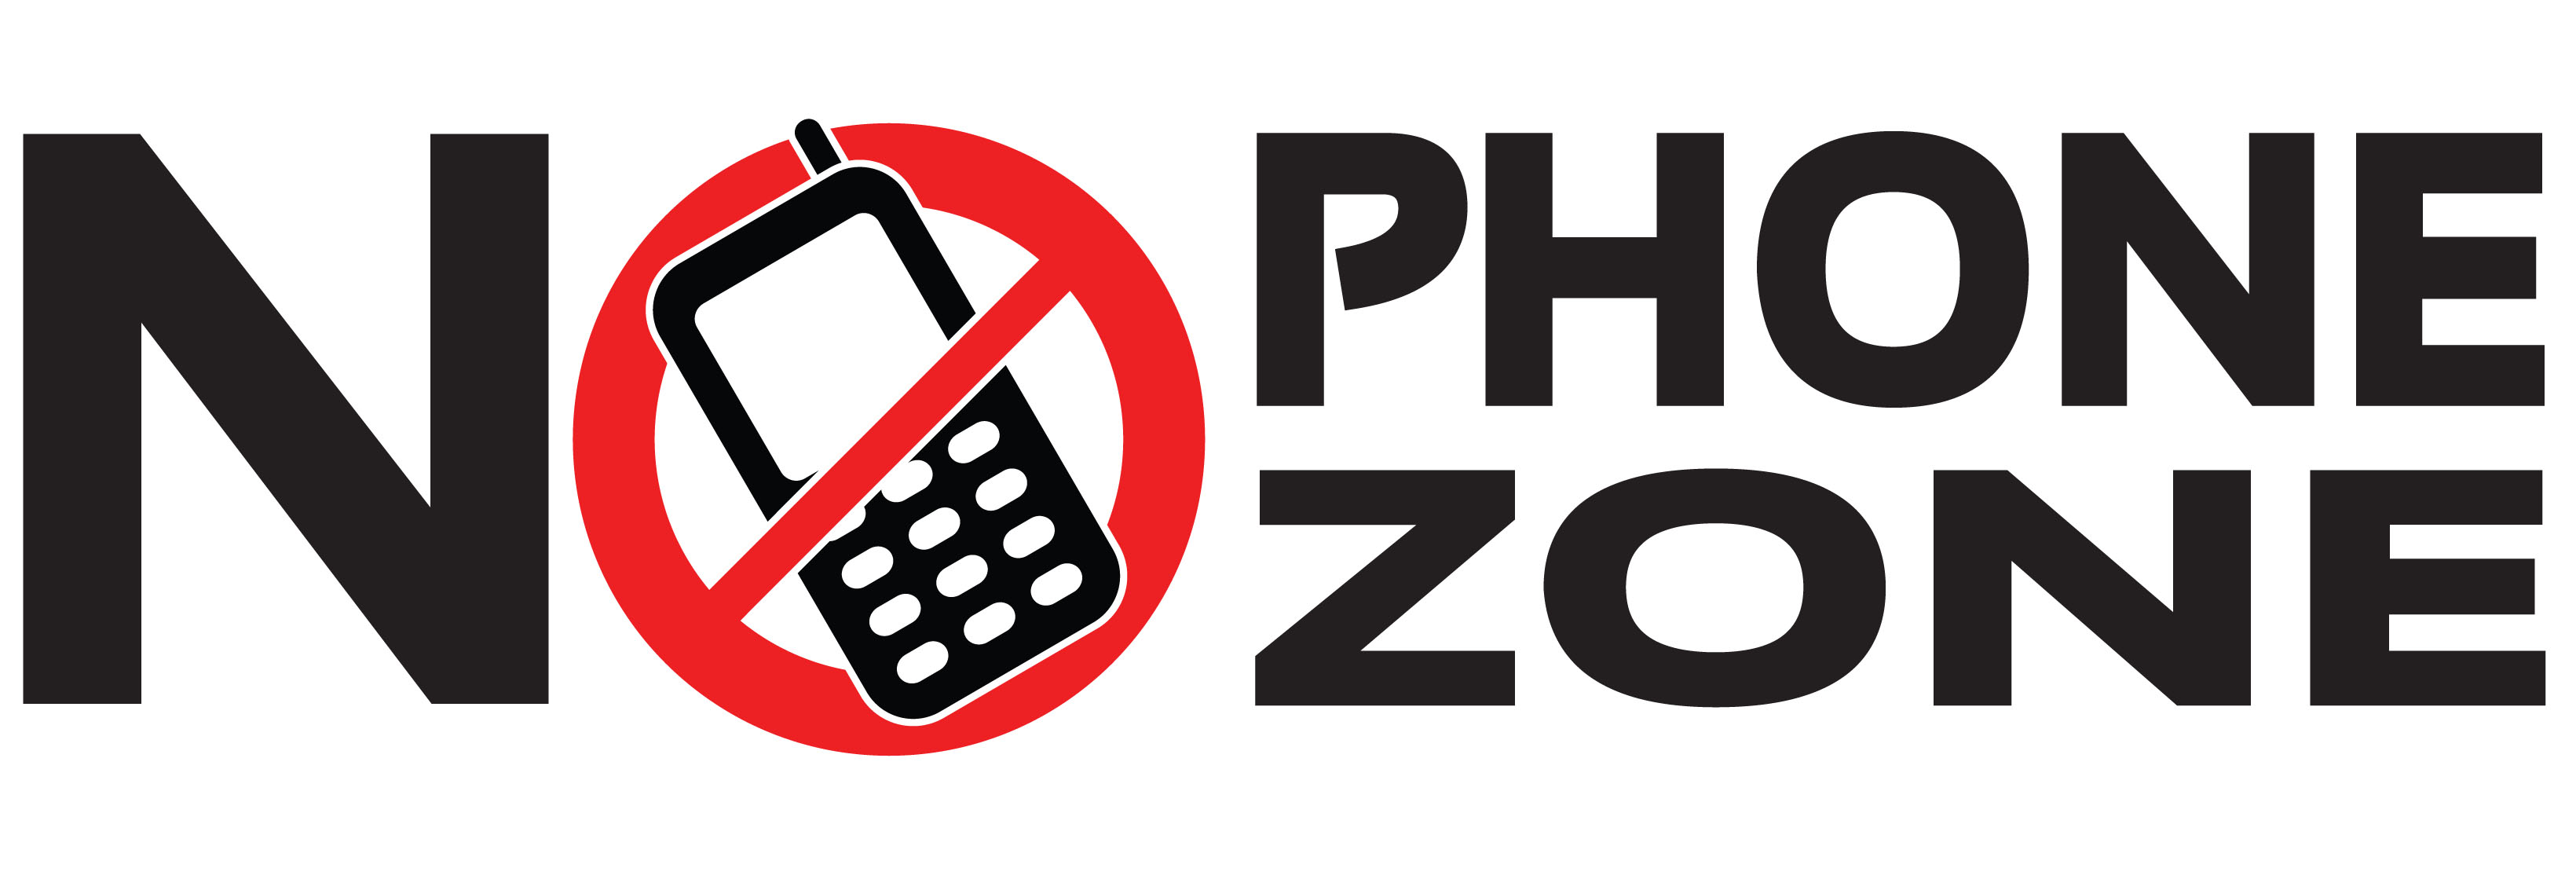 No mobile phone clipart